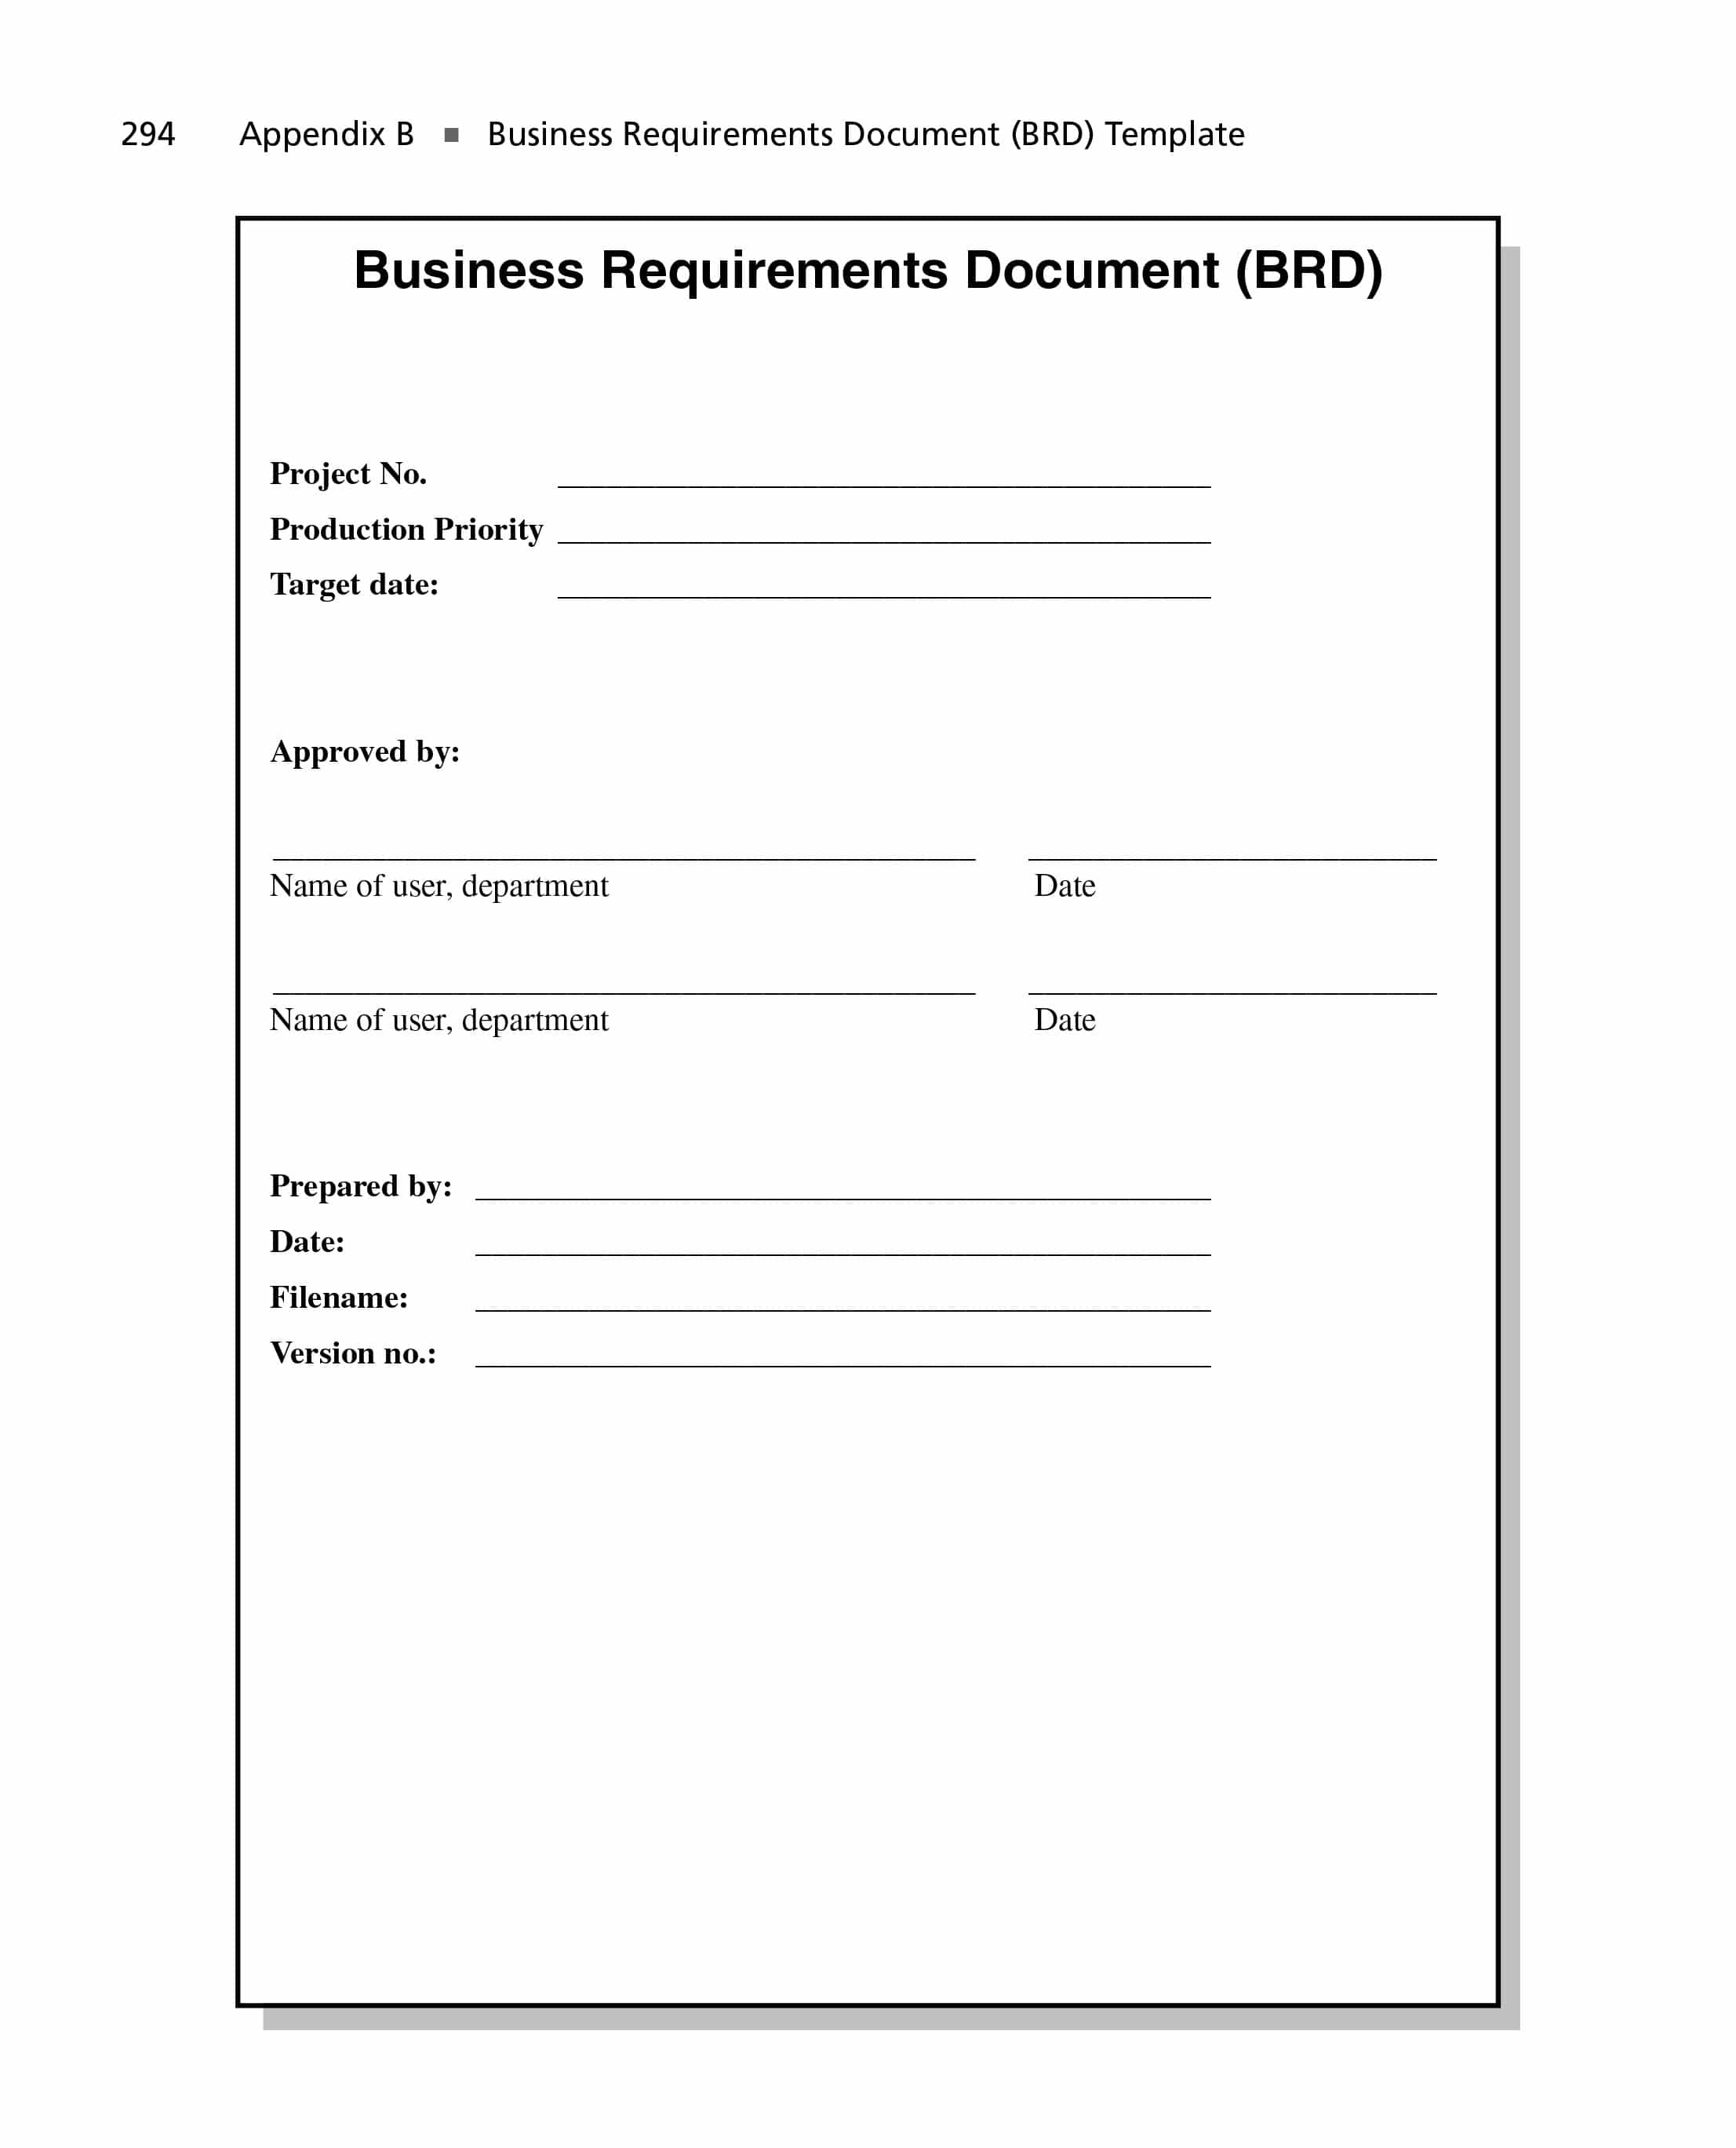 40+ Simple Business Requirements Document Templates   Template Lab